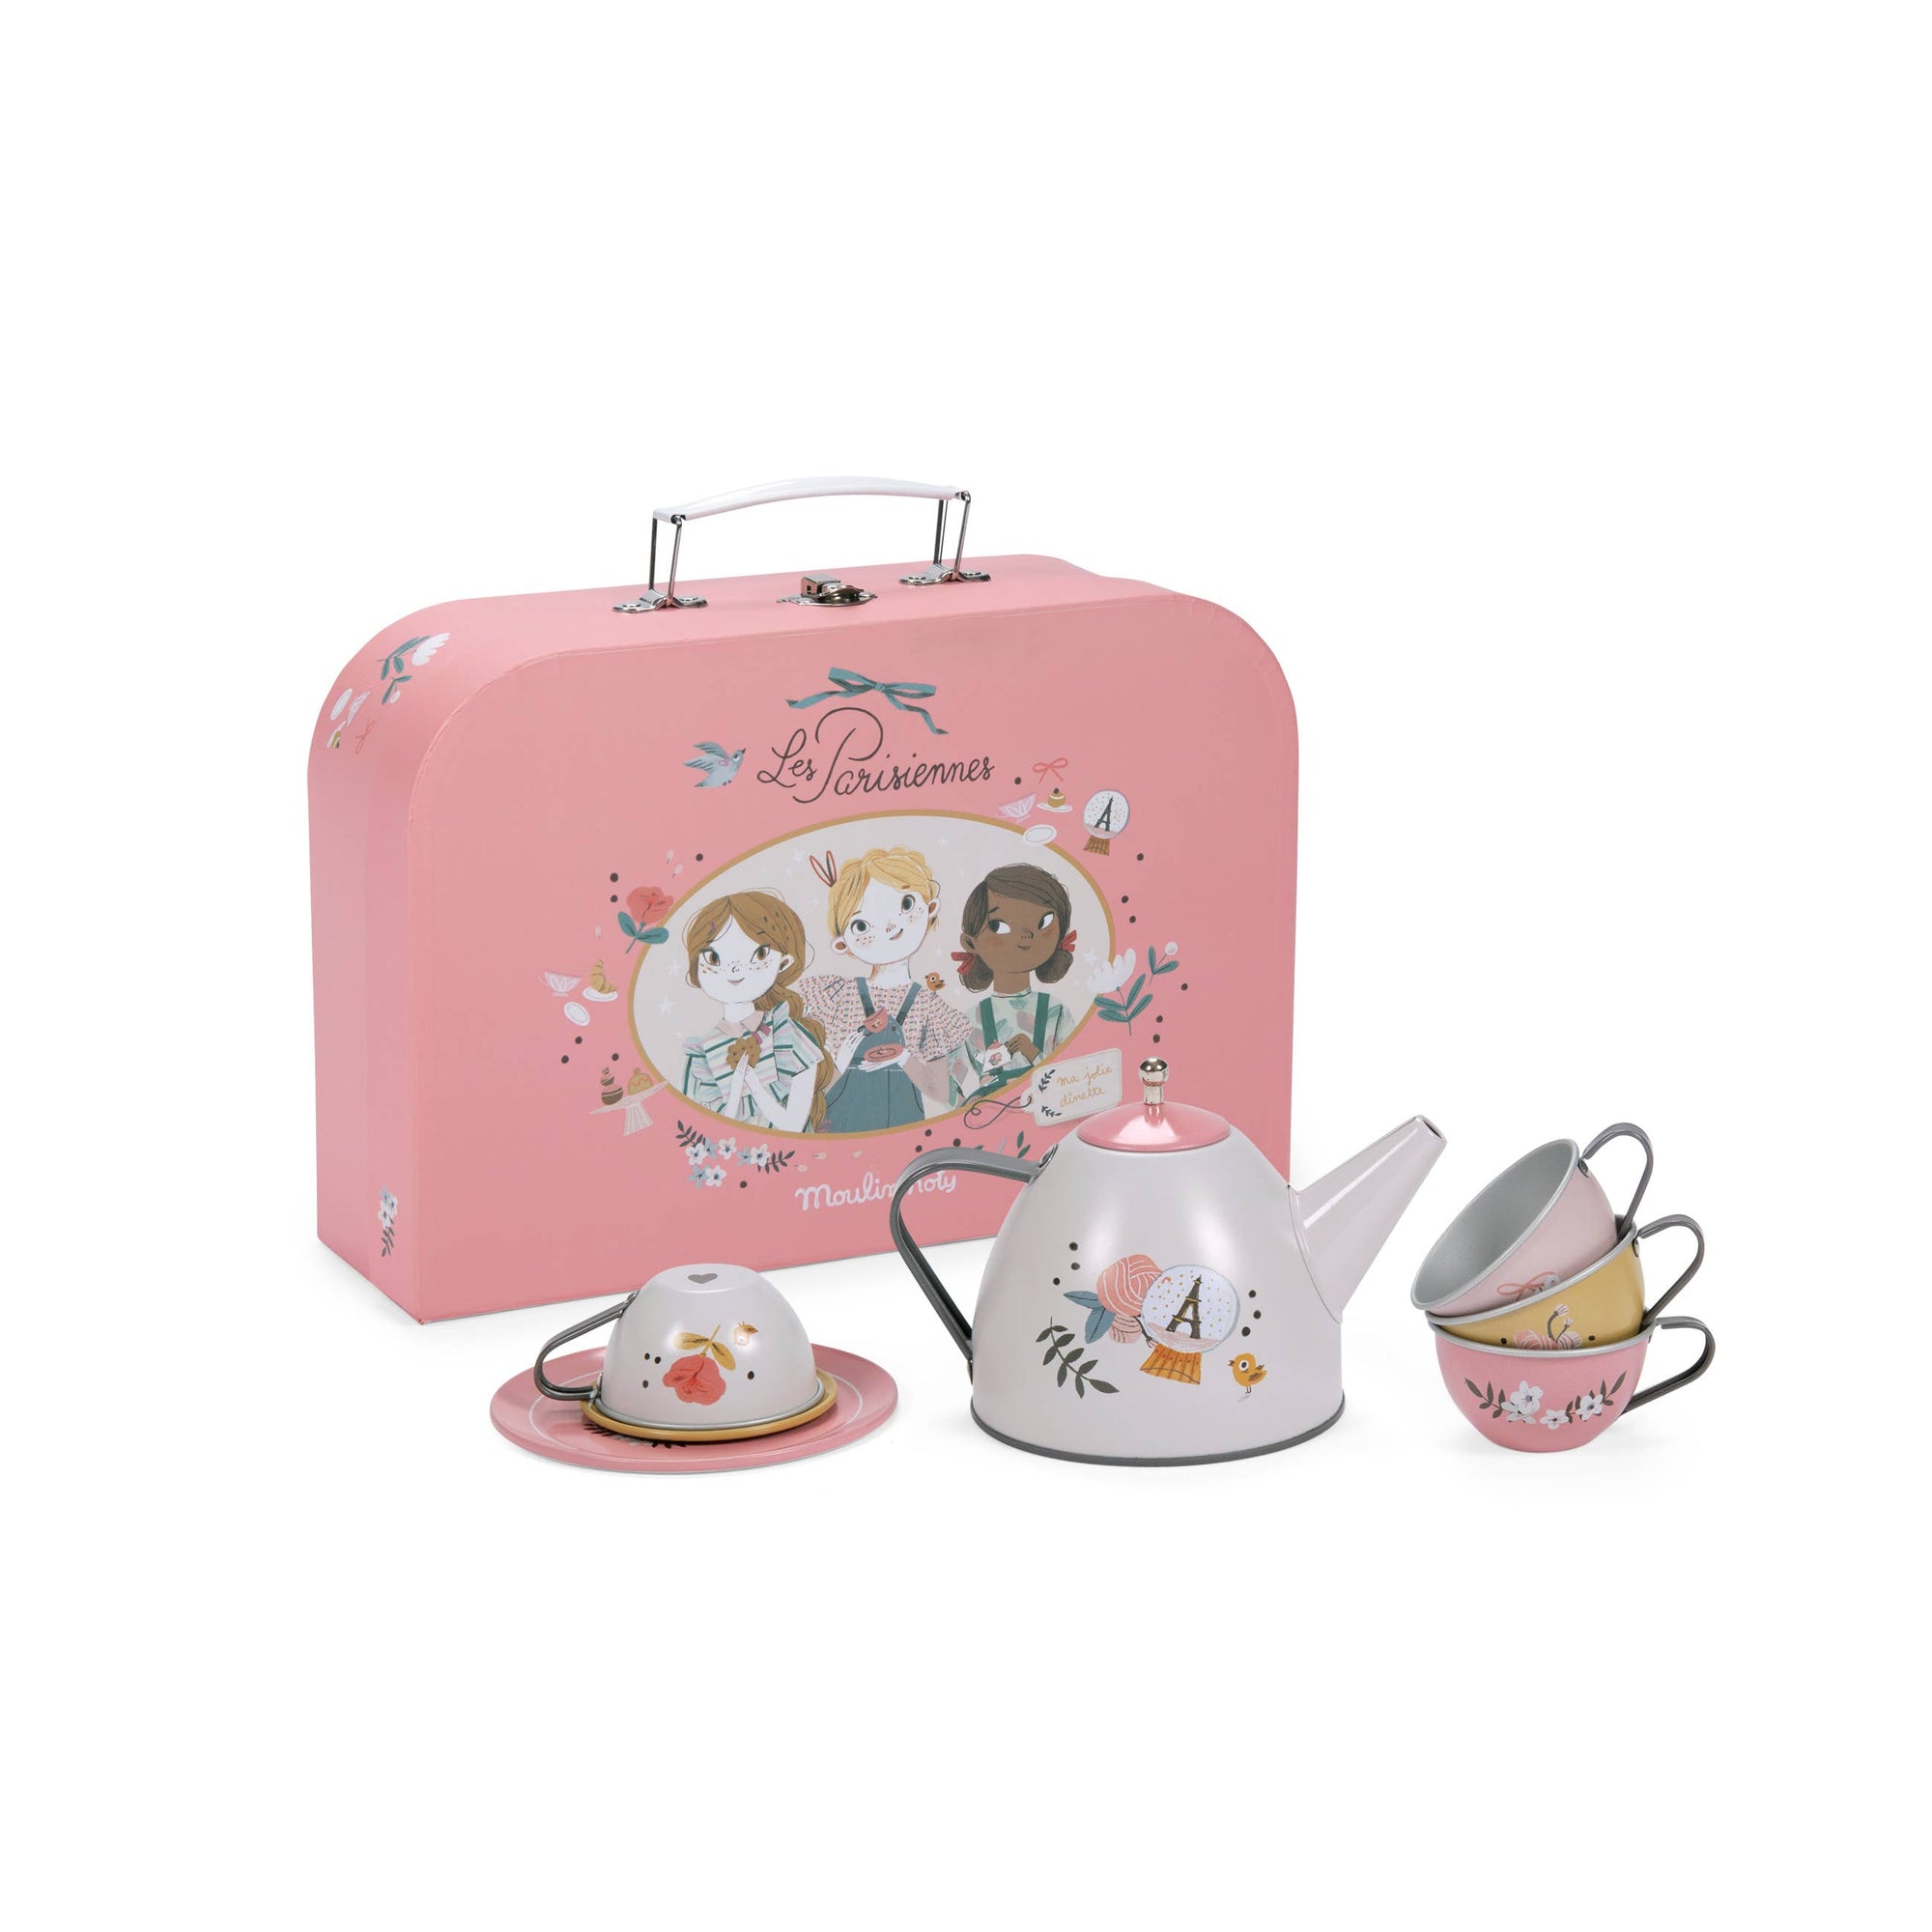 Moulin Roty Suitcase - New Tea Party Metal Set The Parisiennes